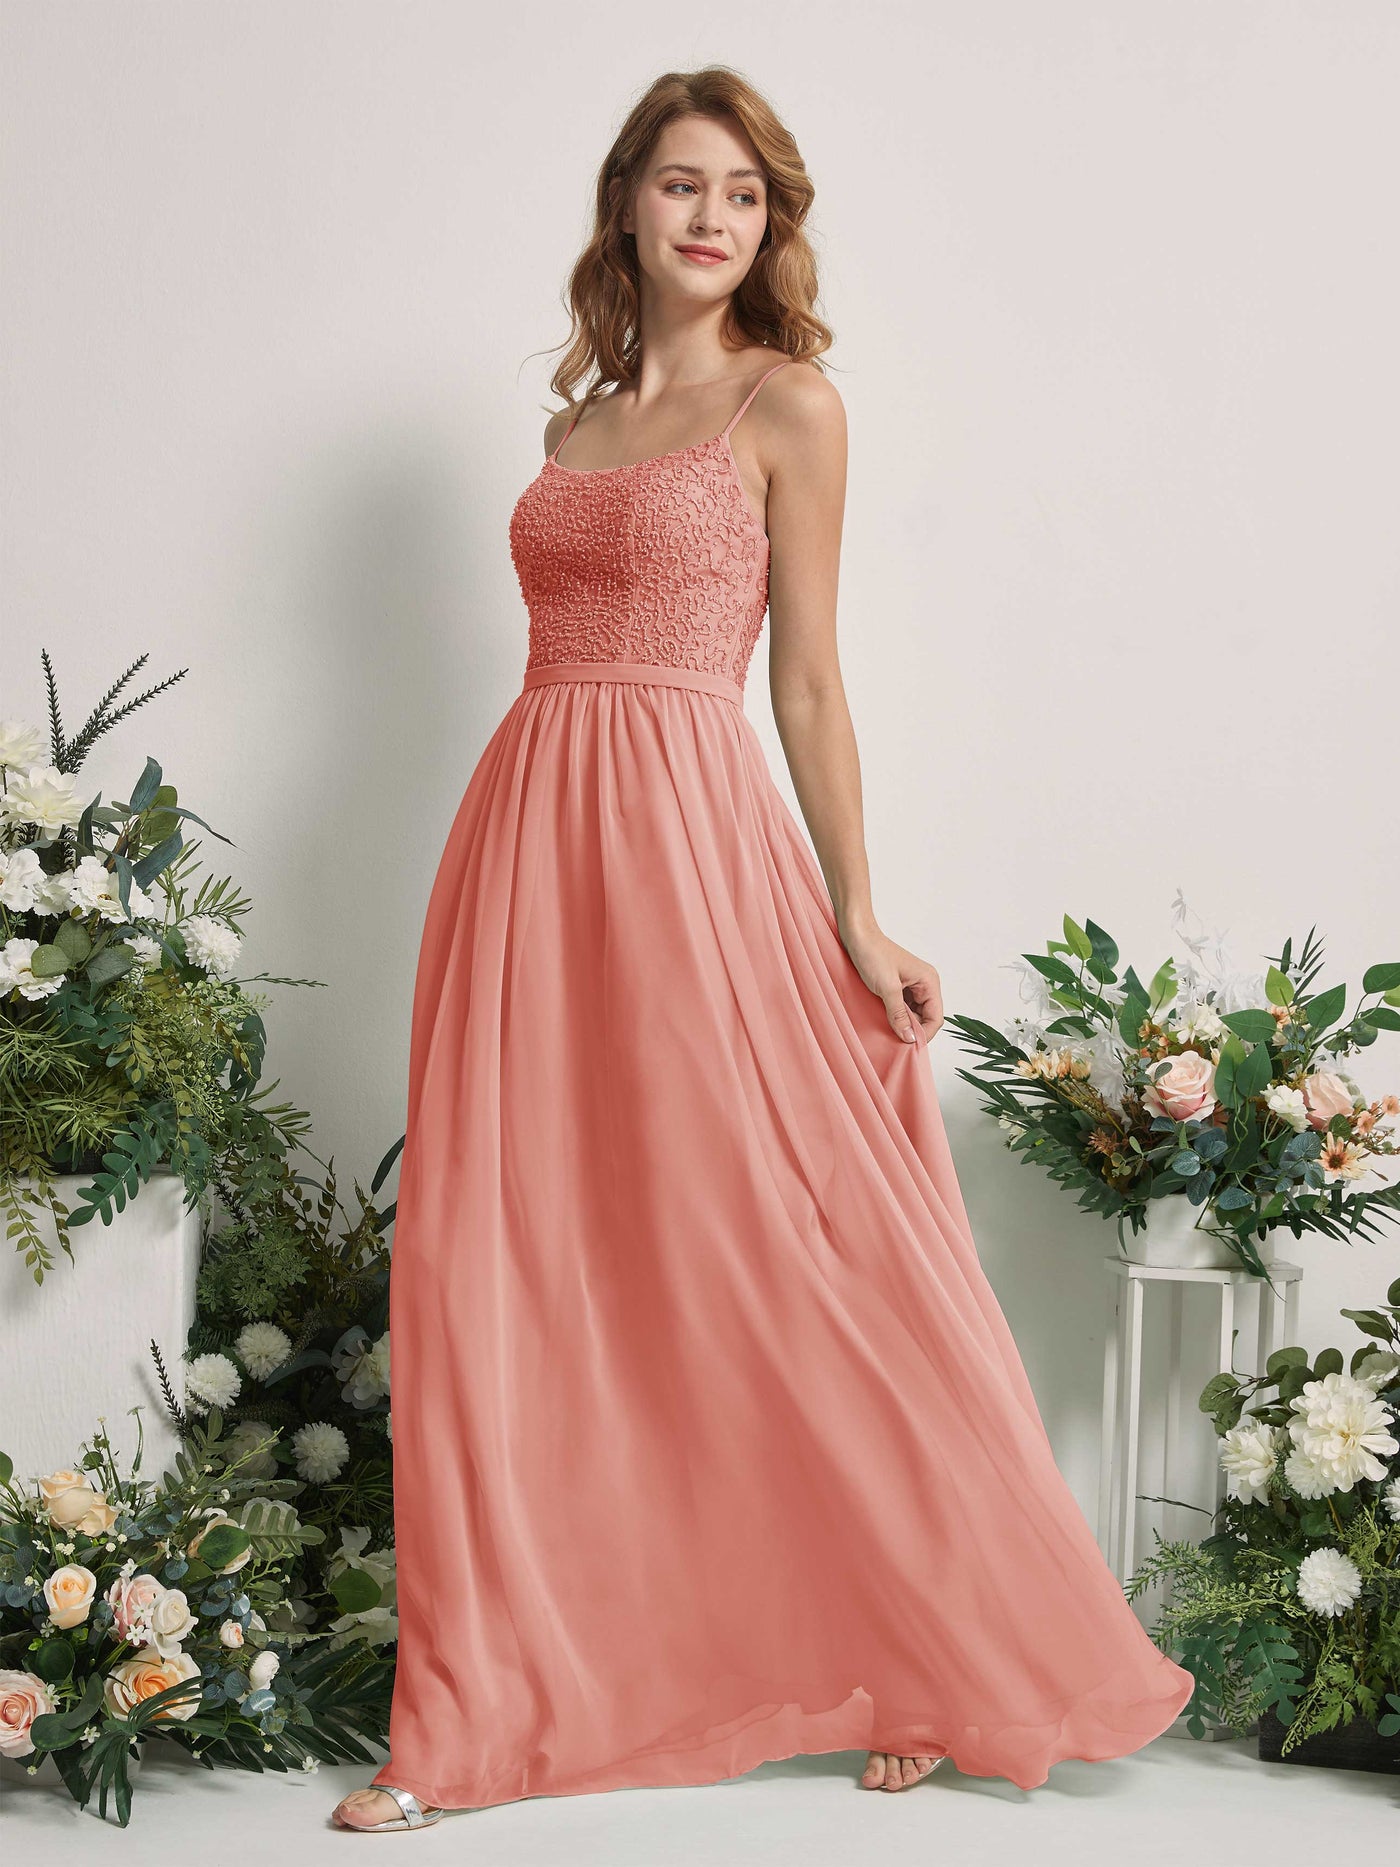 Champagne Rose Bridesmaid Dresses A-line Open back Spaghetti-straps Sleeveless Dresses (83220106)#color_champagne-rose